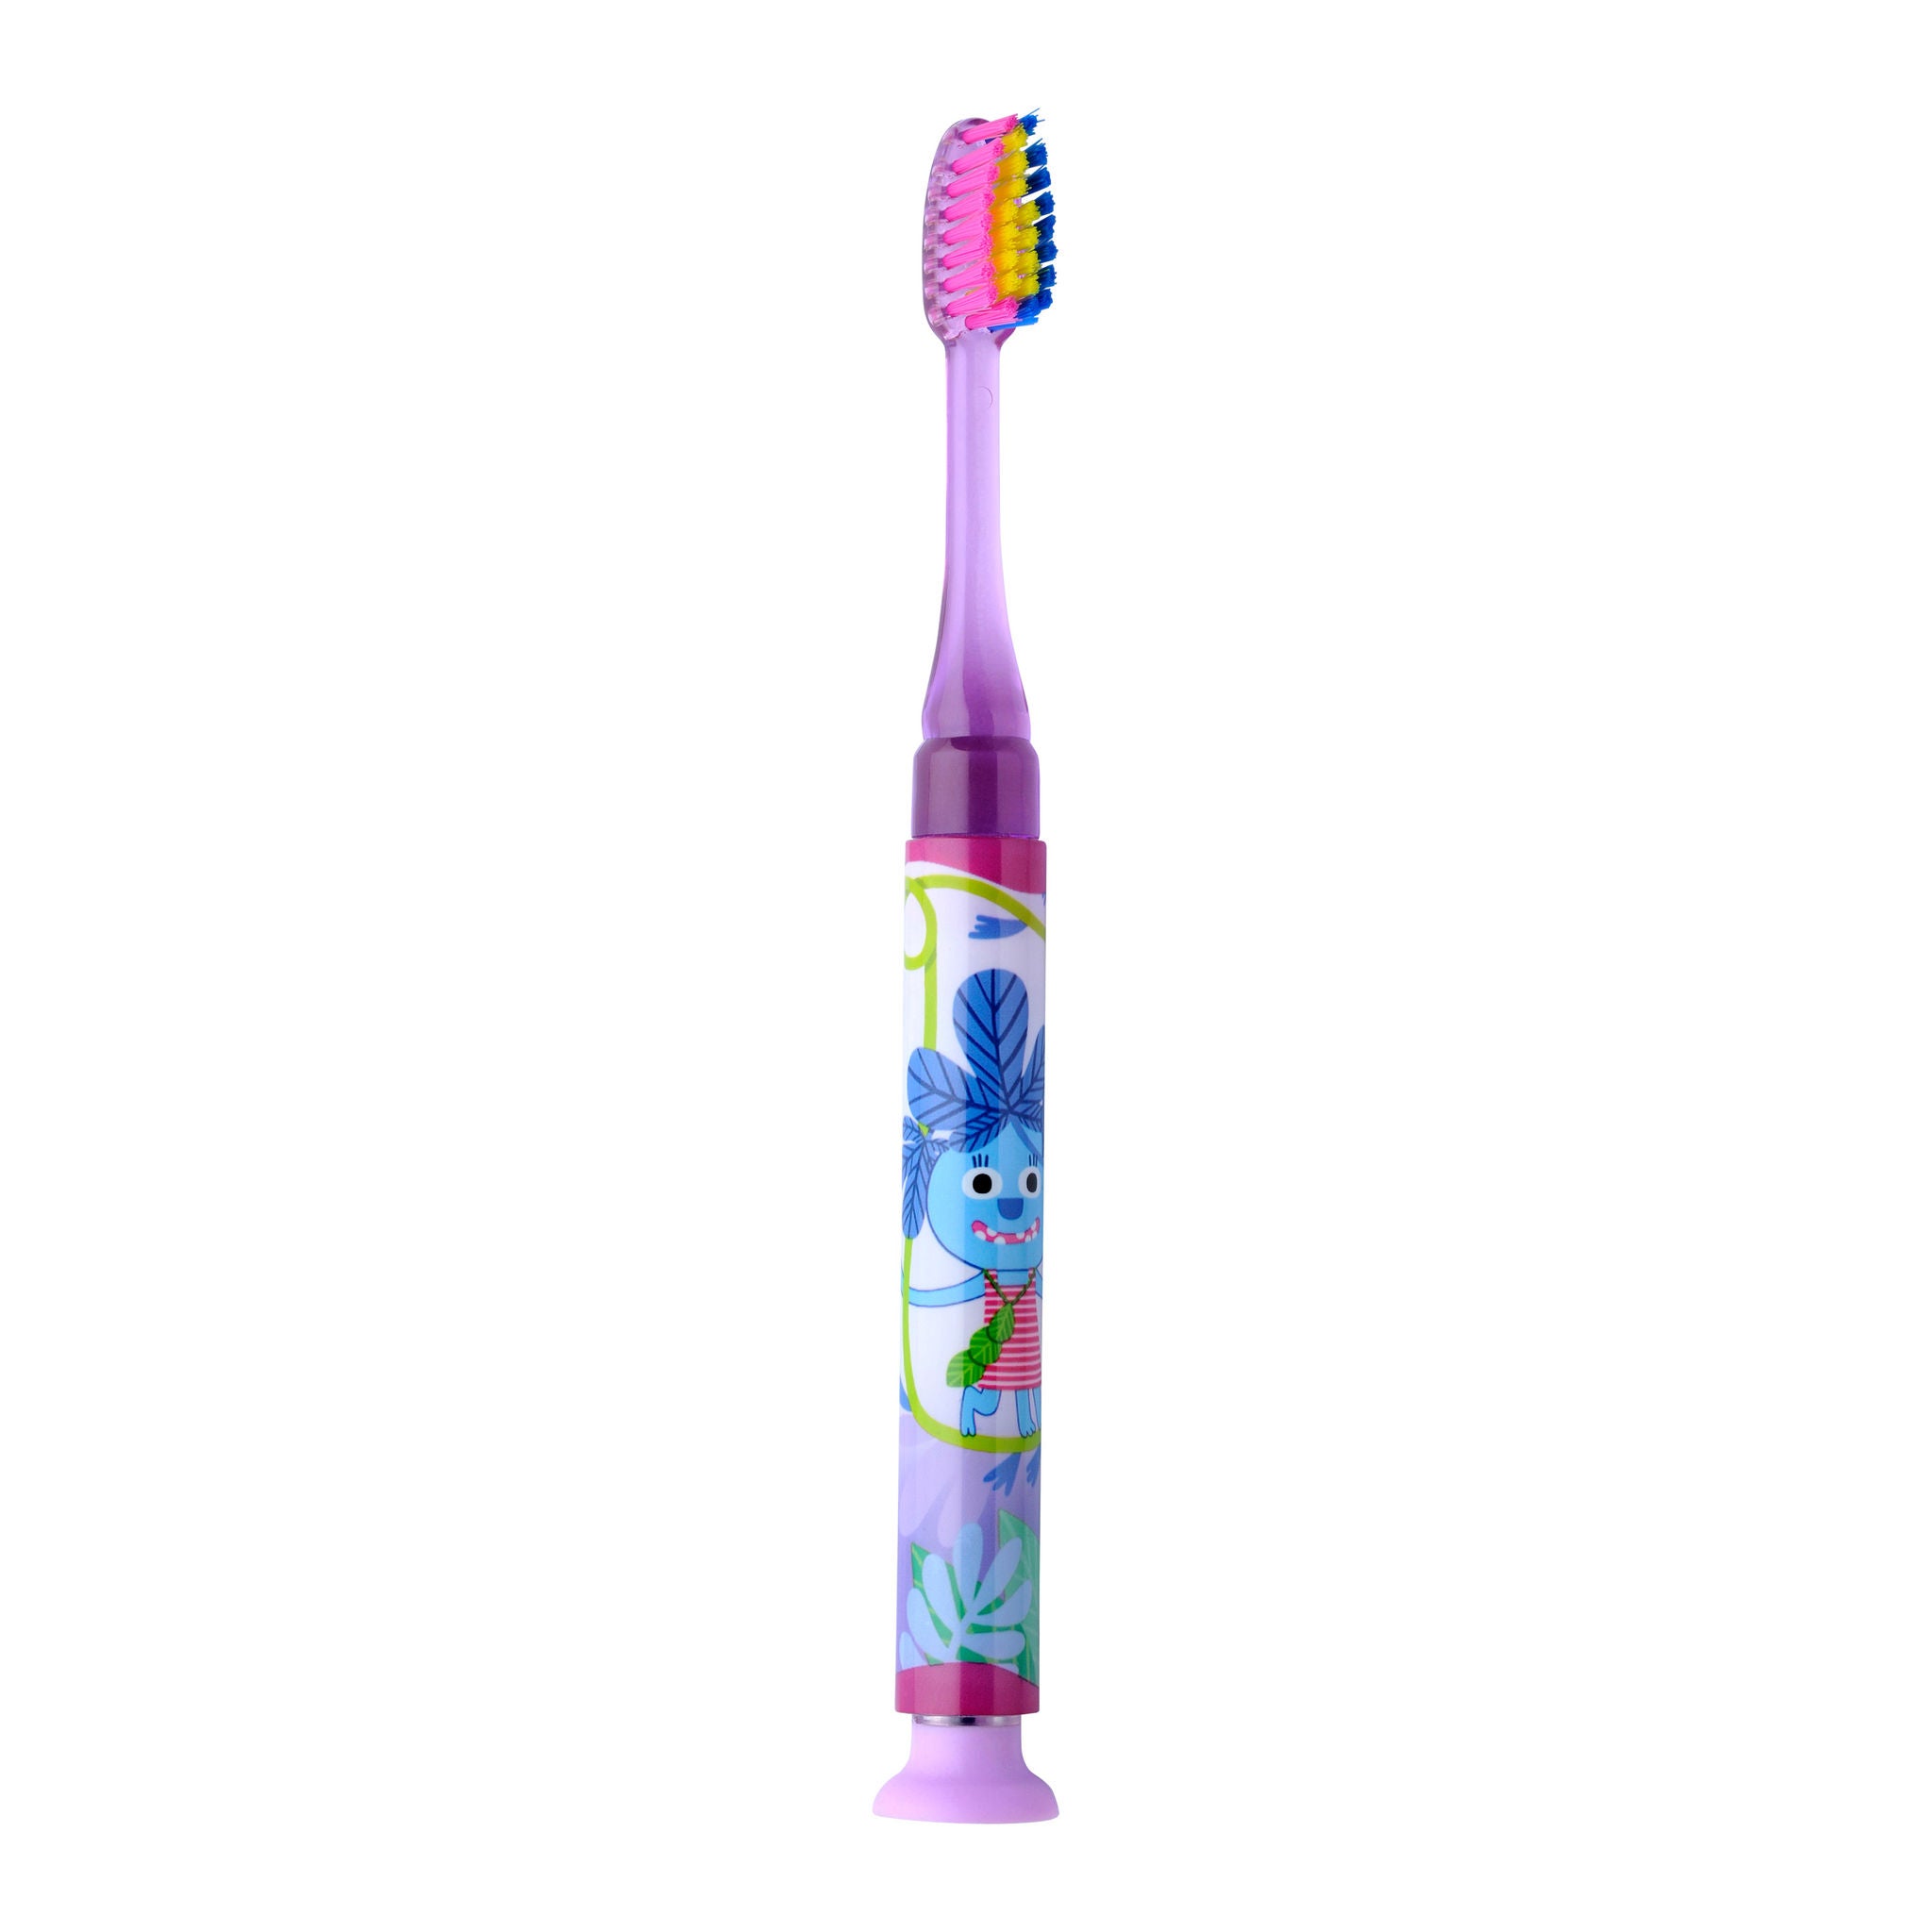 903M2-LILAS-GUM-LIGHT-UP-TOOTHBRUSHES-LILAS-COMPACT-SOFT-N5.jpg